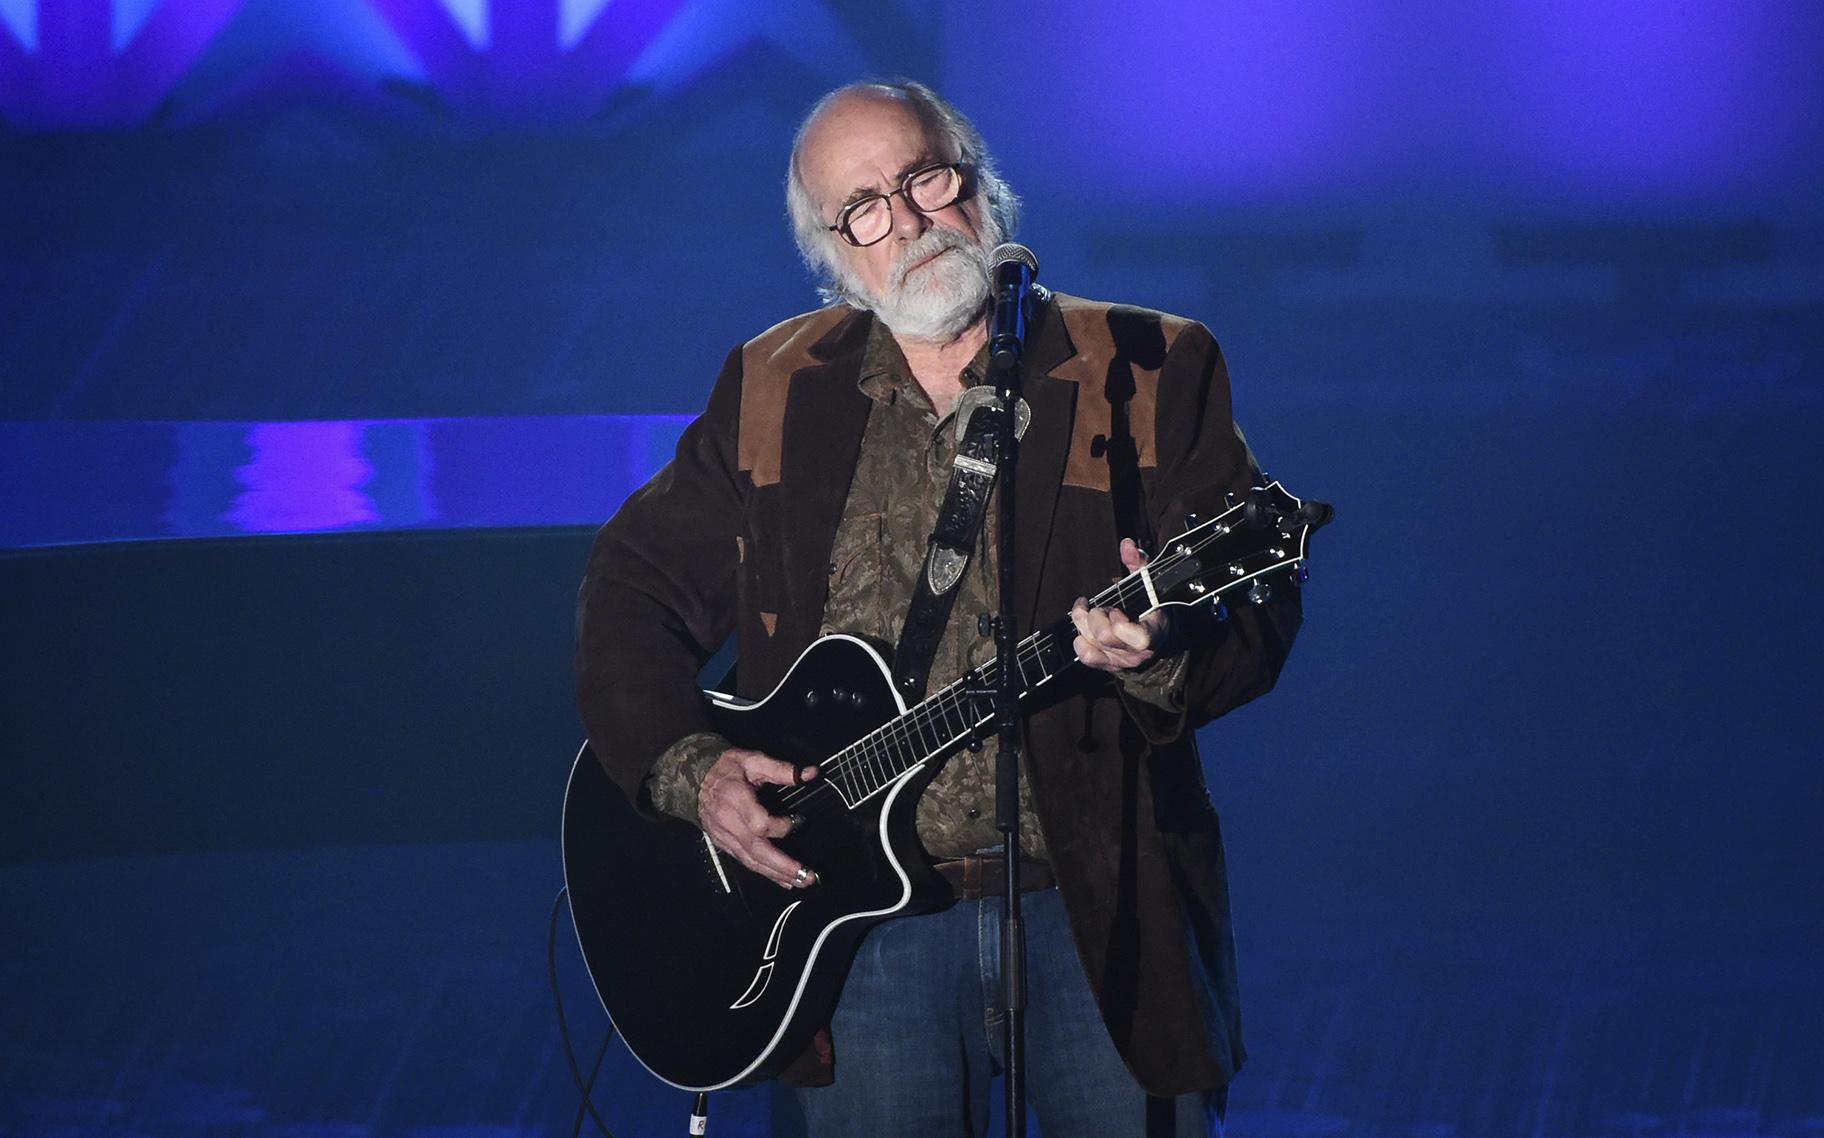 This June 18, 2015 file photo shows Robert Hunter at the 46th Annual Songwriters Hall Of Fame Induction and Awards Gala in New York. (Photo by Evan Agostini / Invision / AP, File)